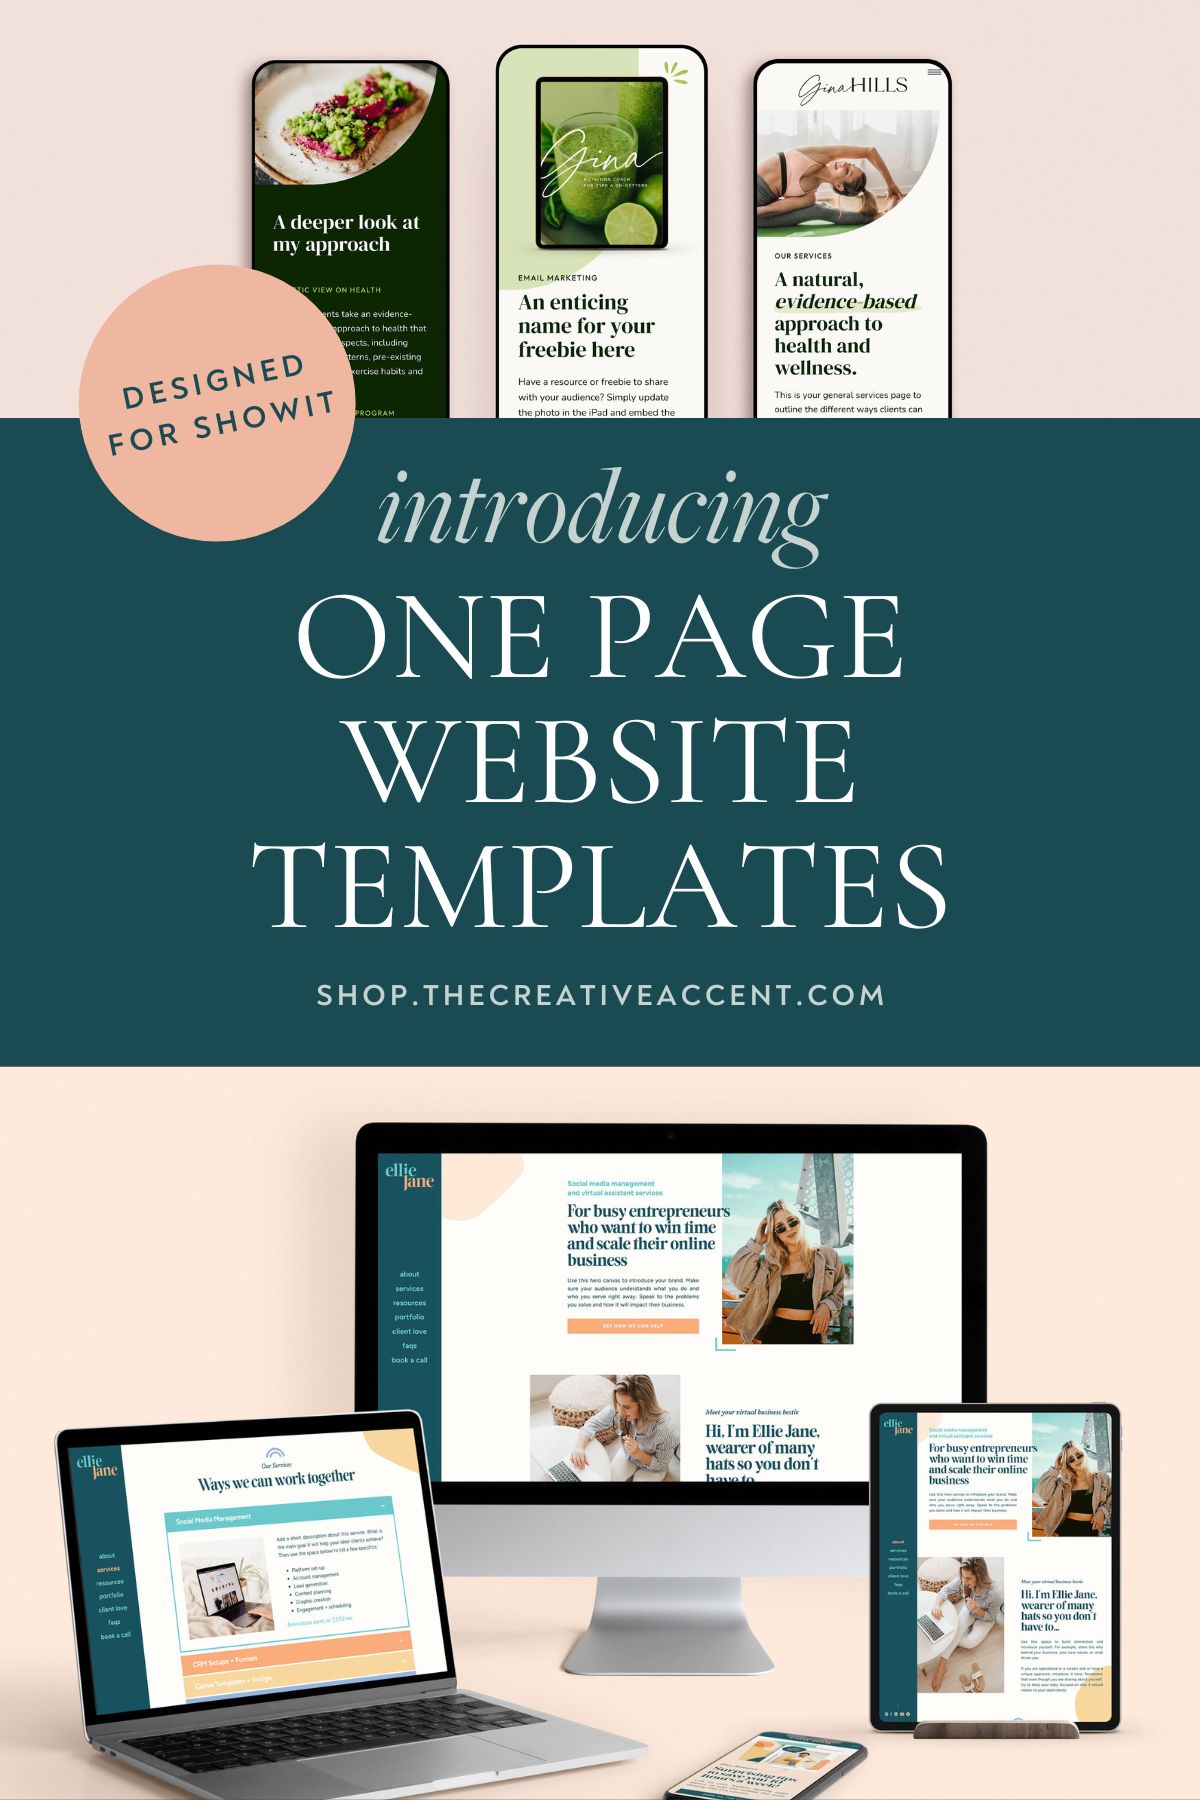 Introducing one page website templates designed for Showit by The Creative Accent